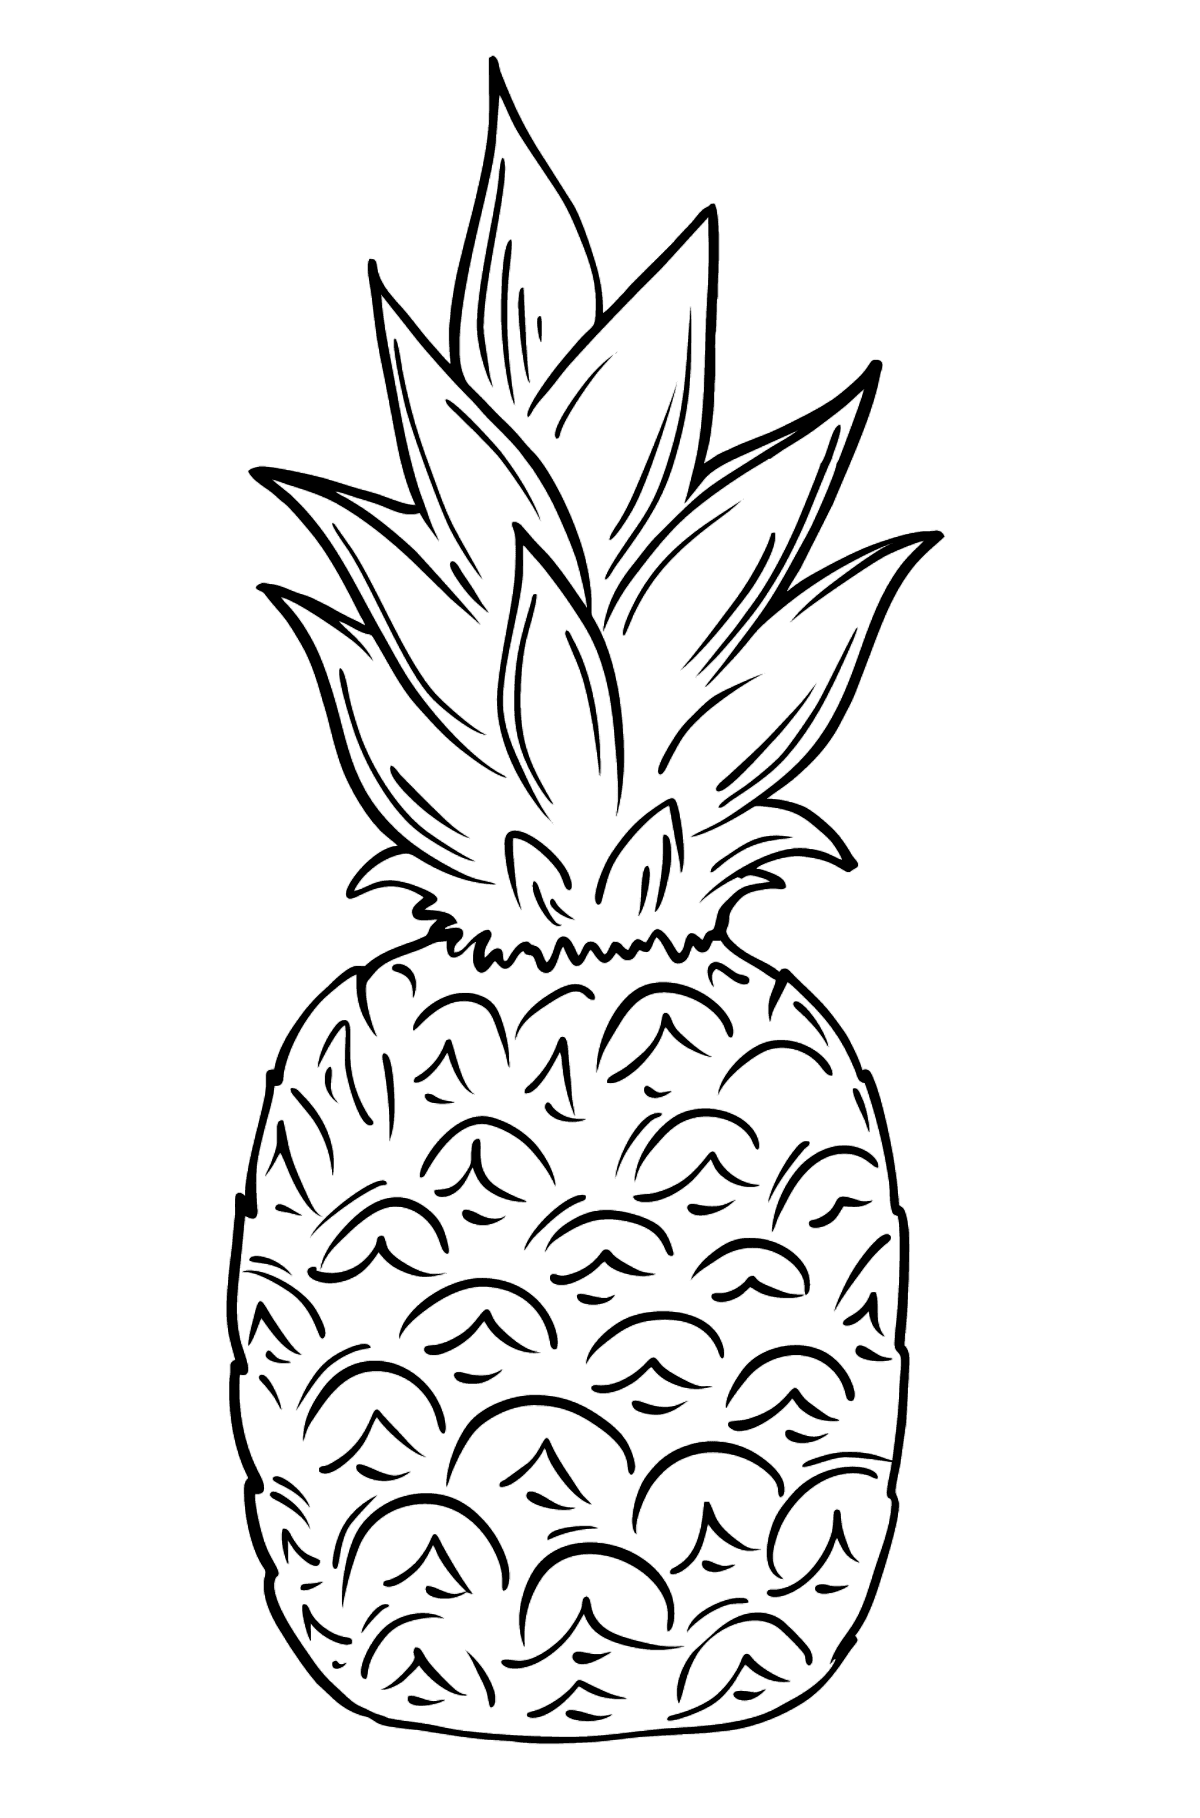 Pineapple coloring page - Coloring Pages for Kids